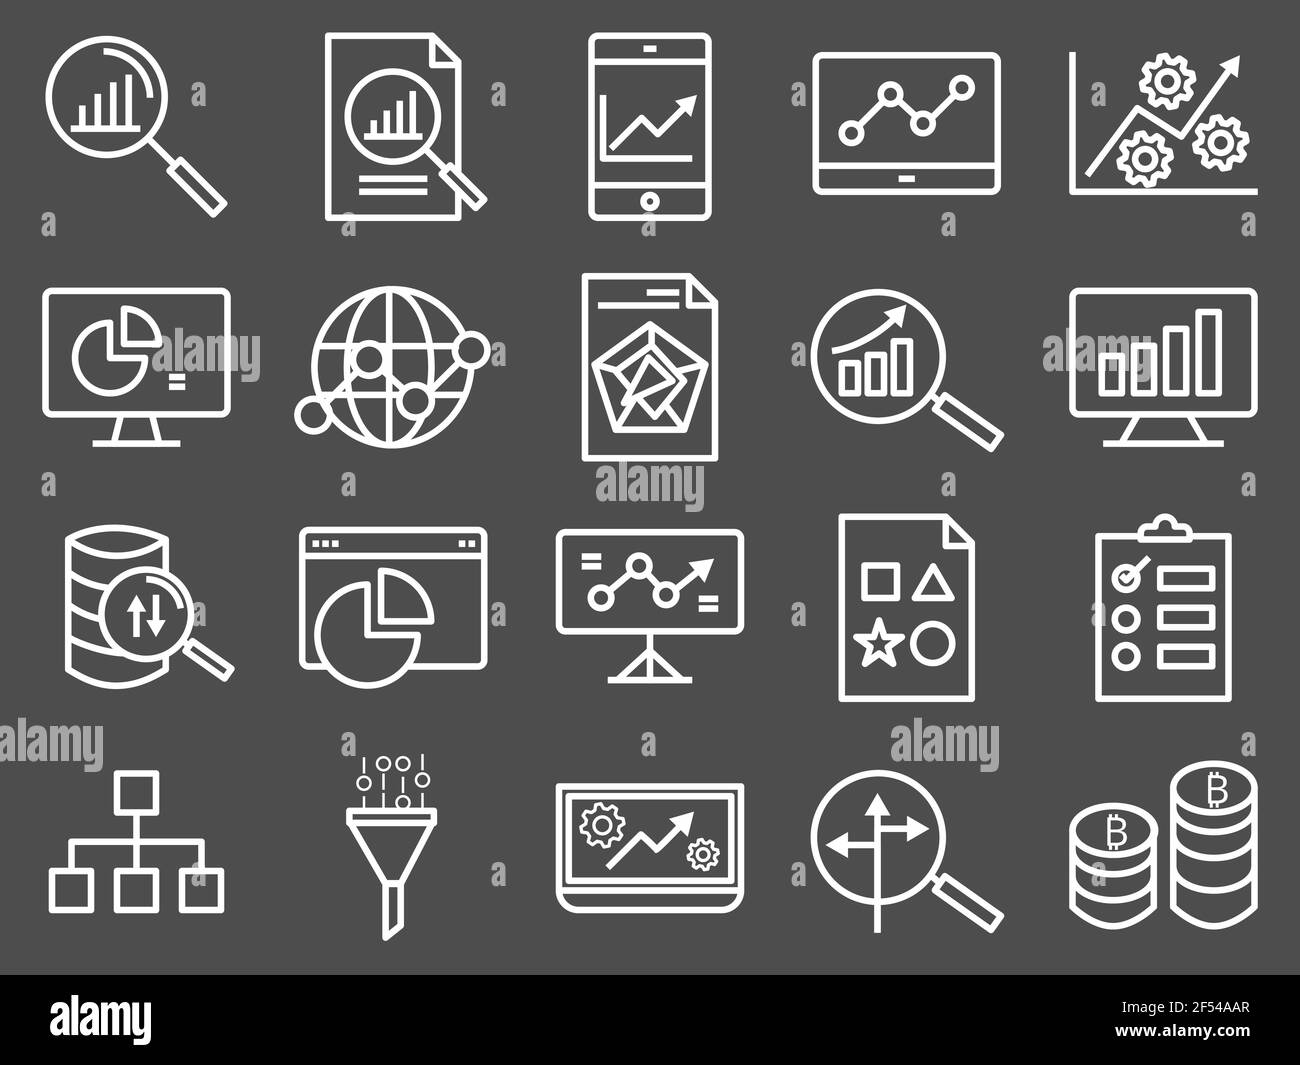 Business data communication information technology outline icon. Data analysis vector. Stock Vector